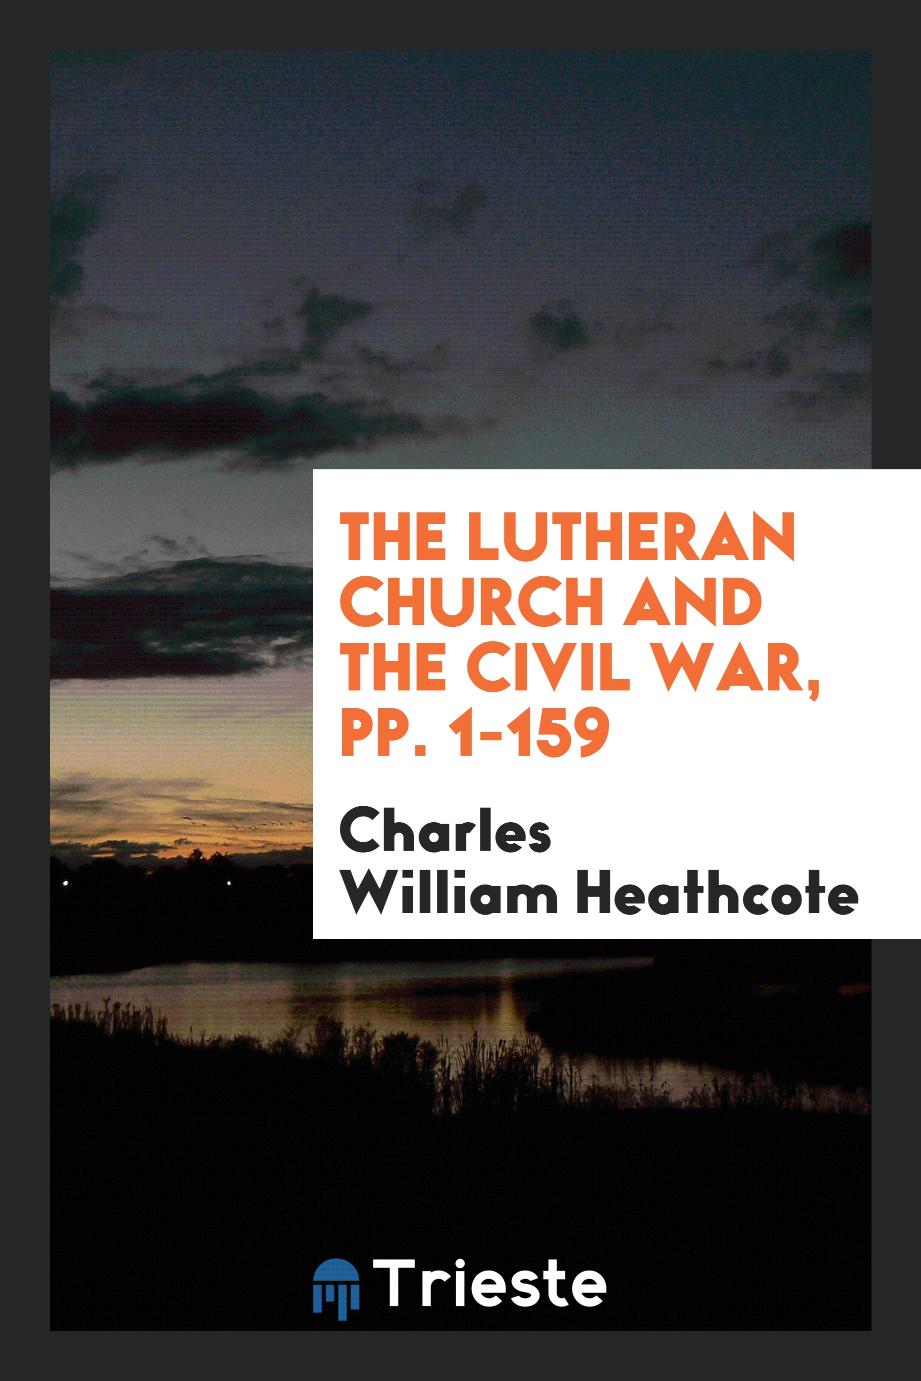 The Lutheran Church and the Civil War, pp. 1-159